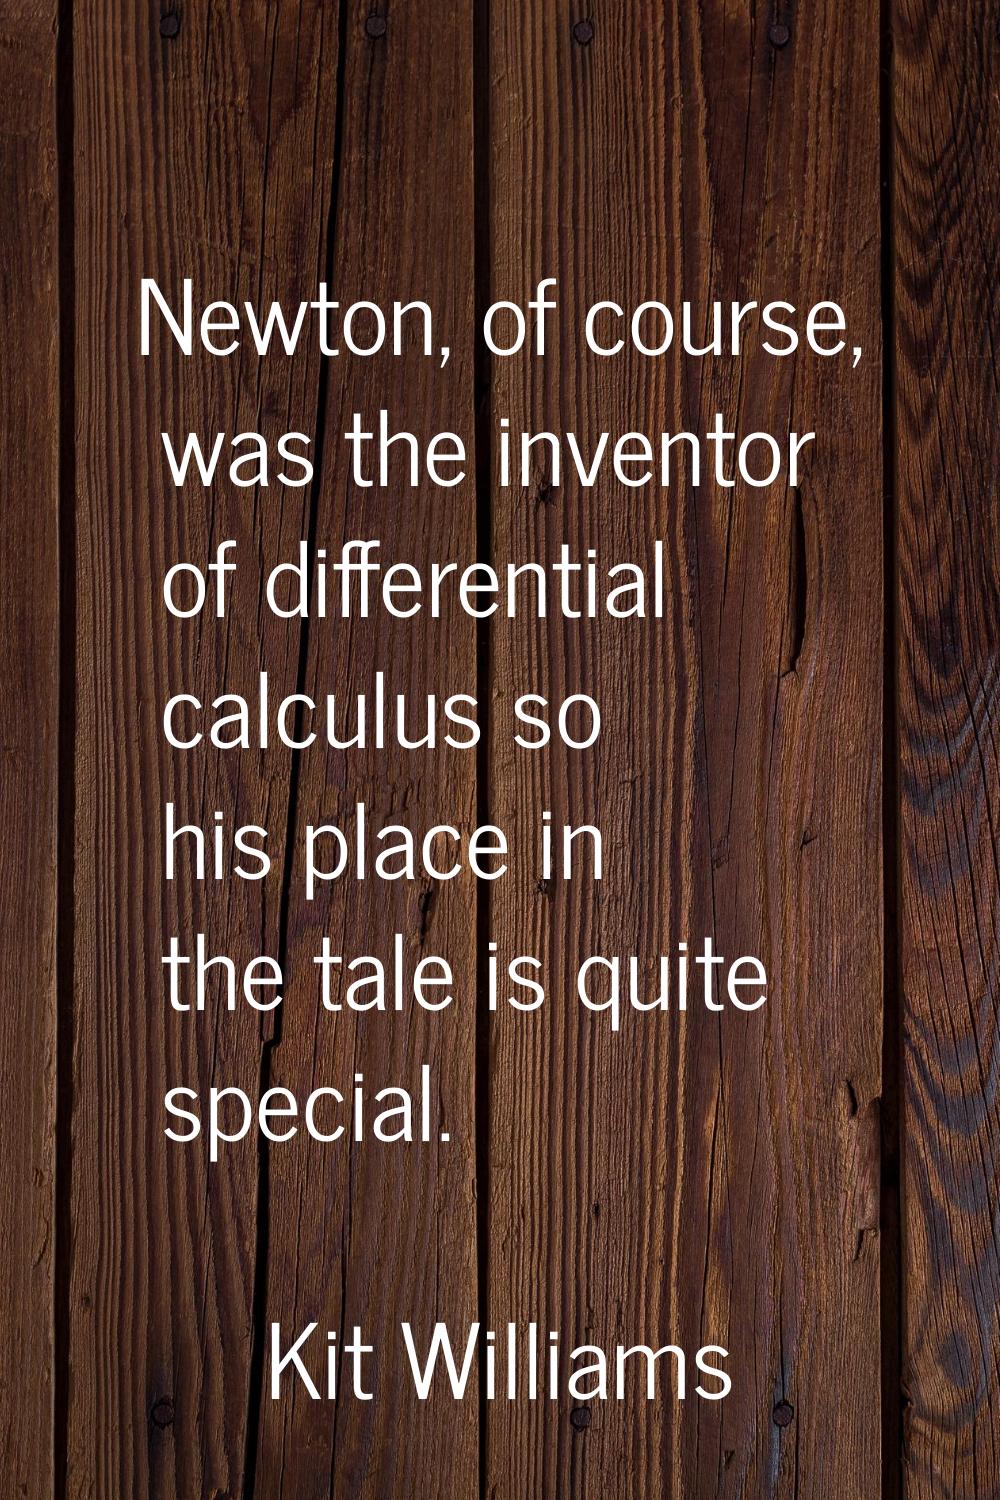 Newton, of course, was the inventor of differential calculus so his place in the tale is quite spec